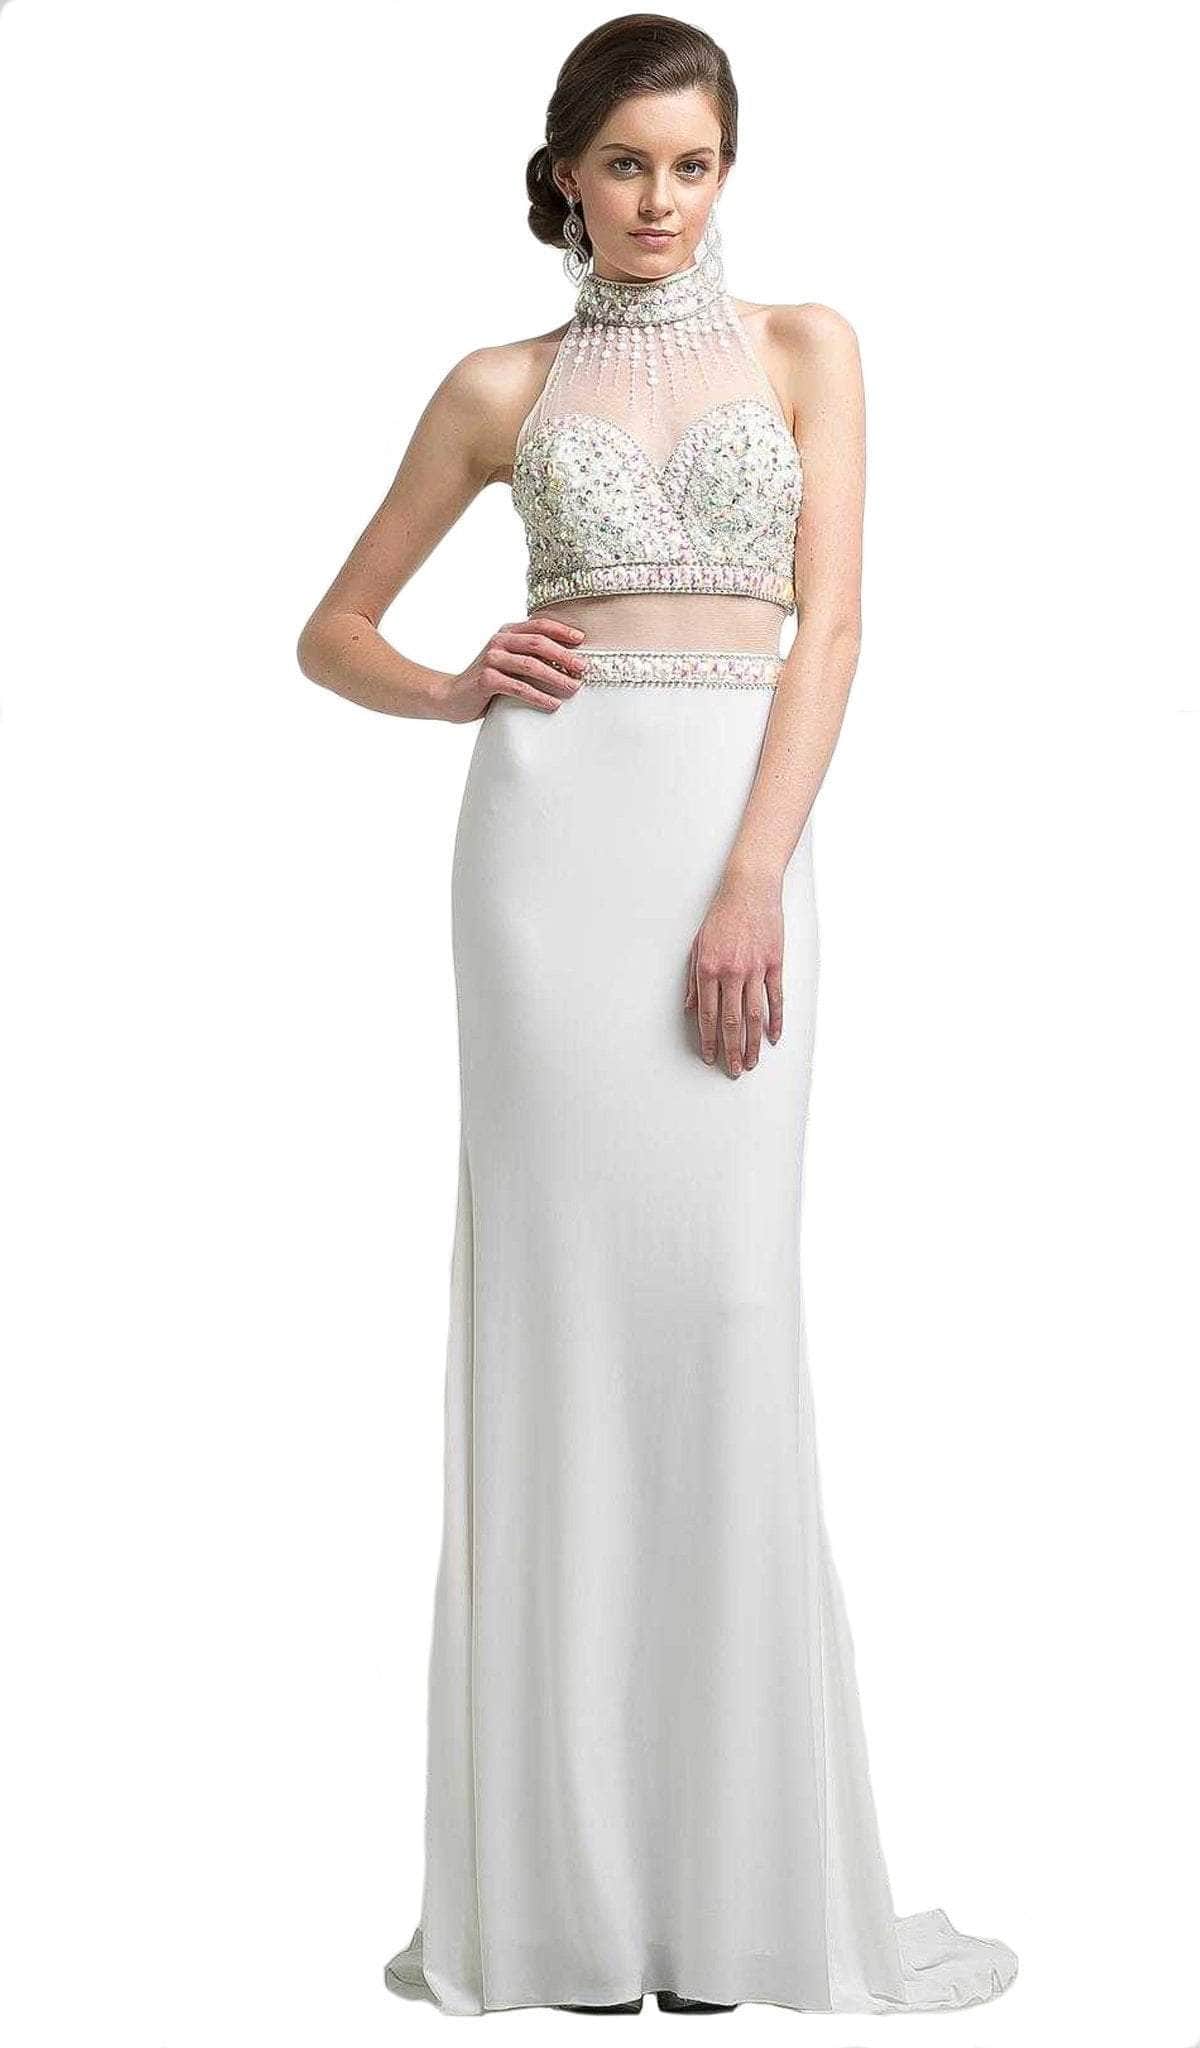 Ladivine, Ladivine KD087 - Beaded High Neck Faux Two-Piece Sheath Long Gown